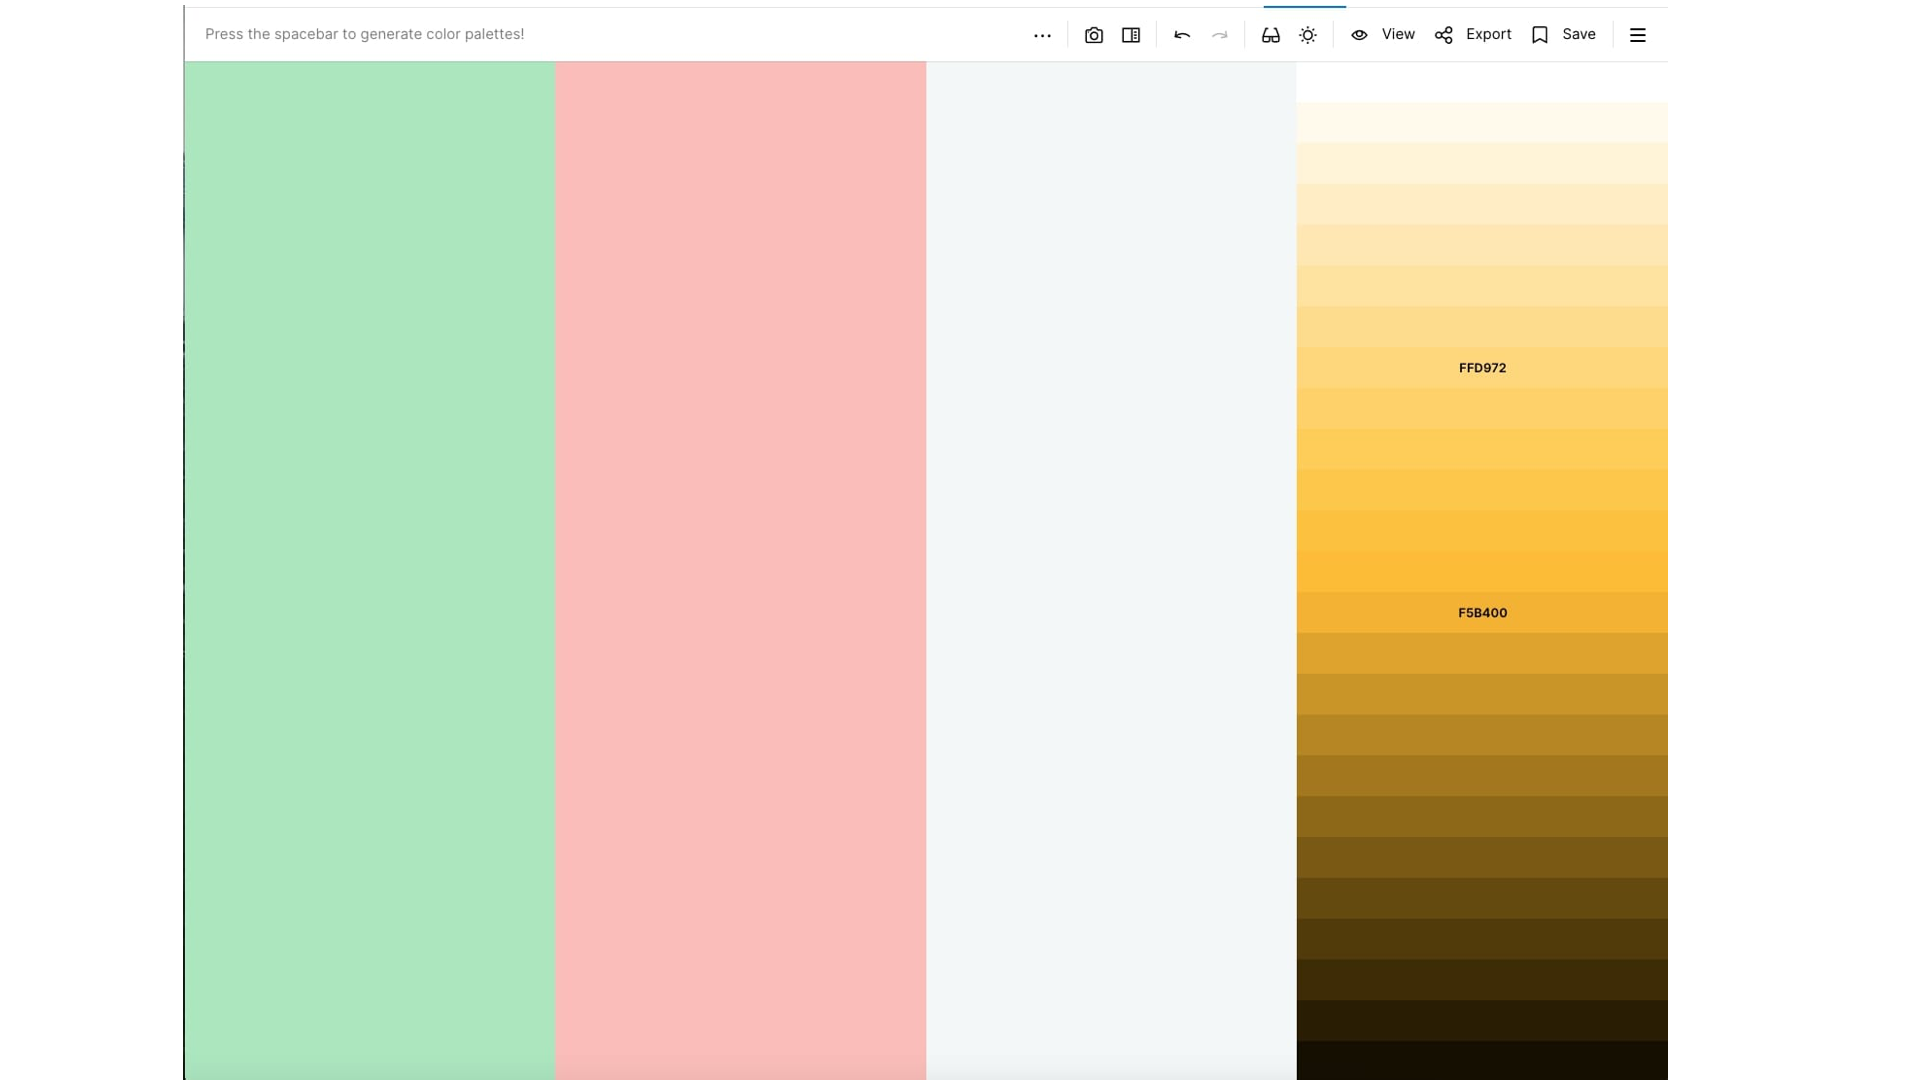 An example of a colour library with multiple shades and tones